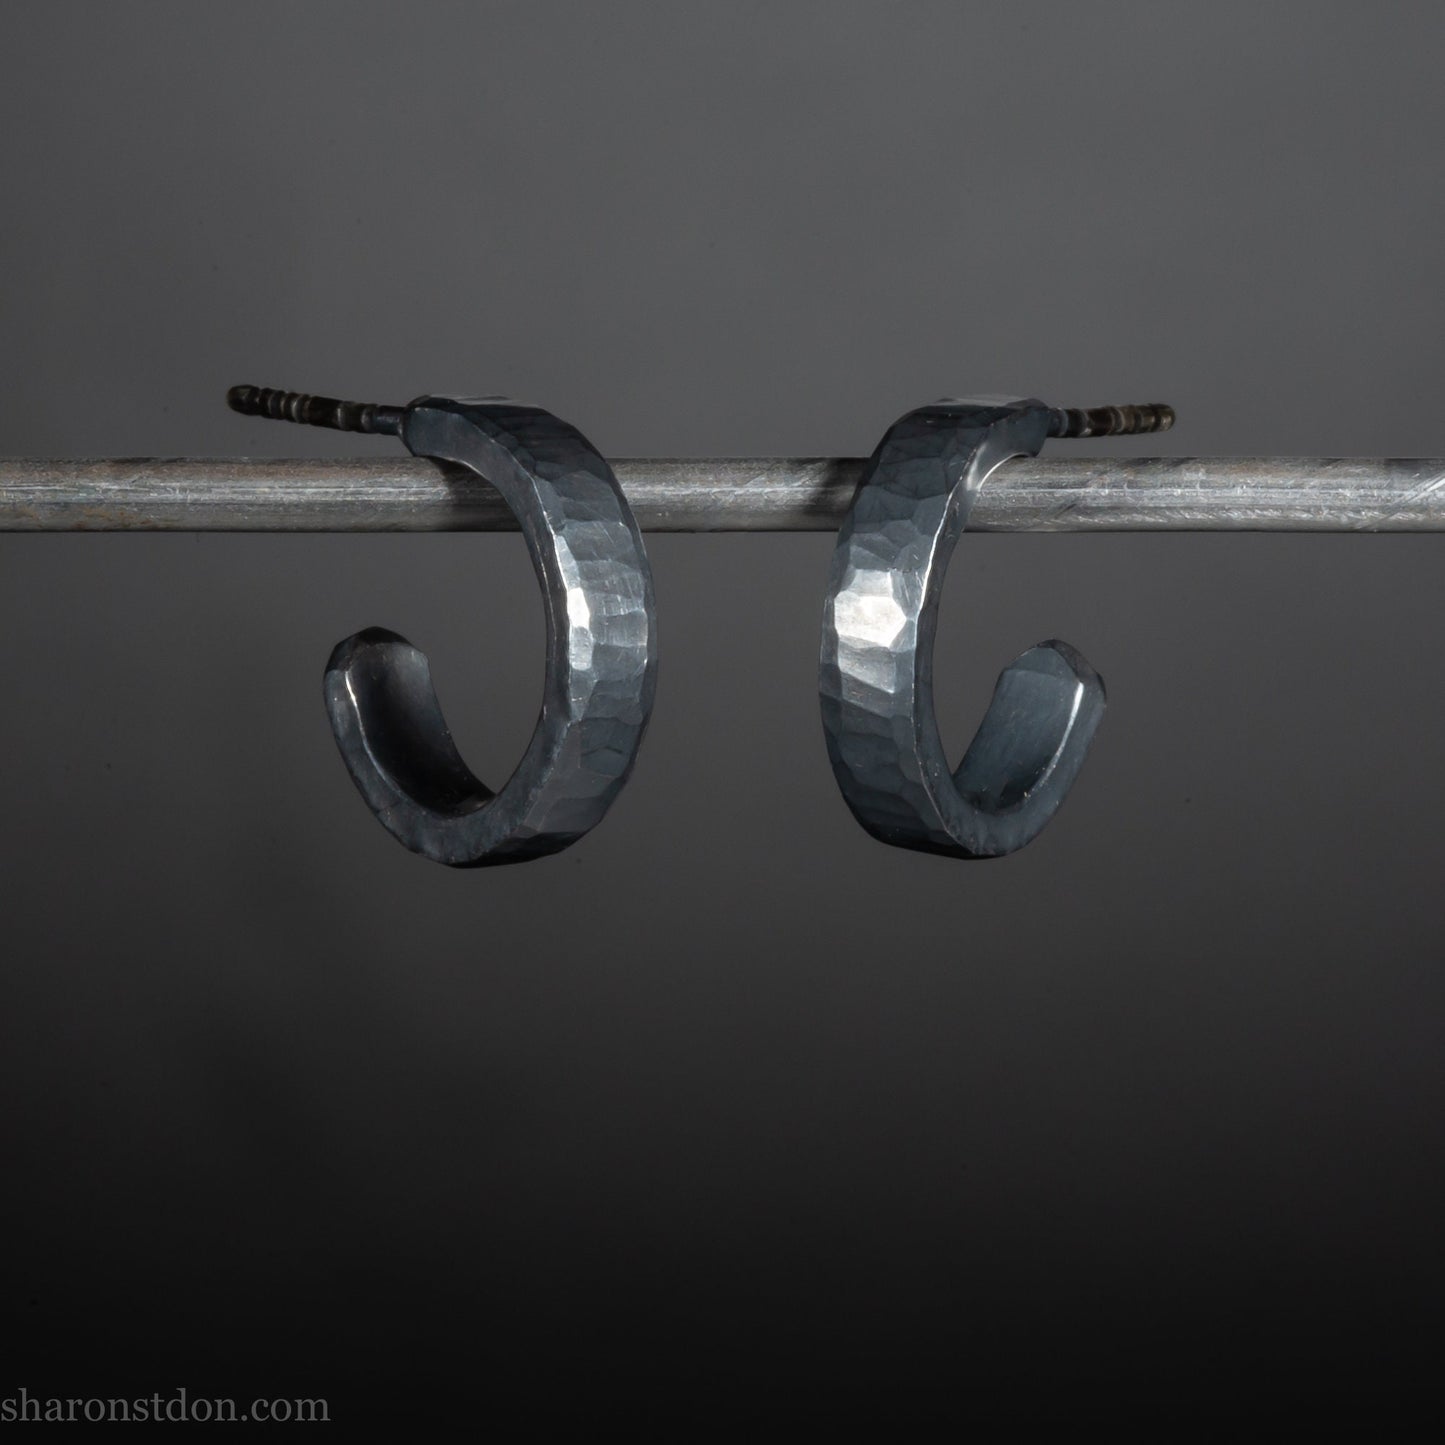 14mm x 3mm small sterling silver hoop earrings, oxidized black. Handmade in North America by Sharon SaintDon. Hammered texture, solid silver with silver posts and backs for men or women, unisex.